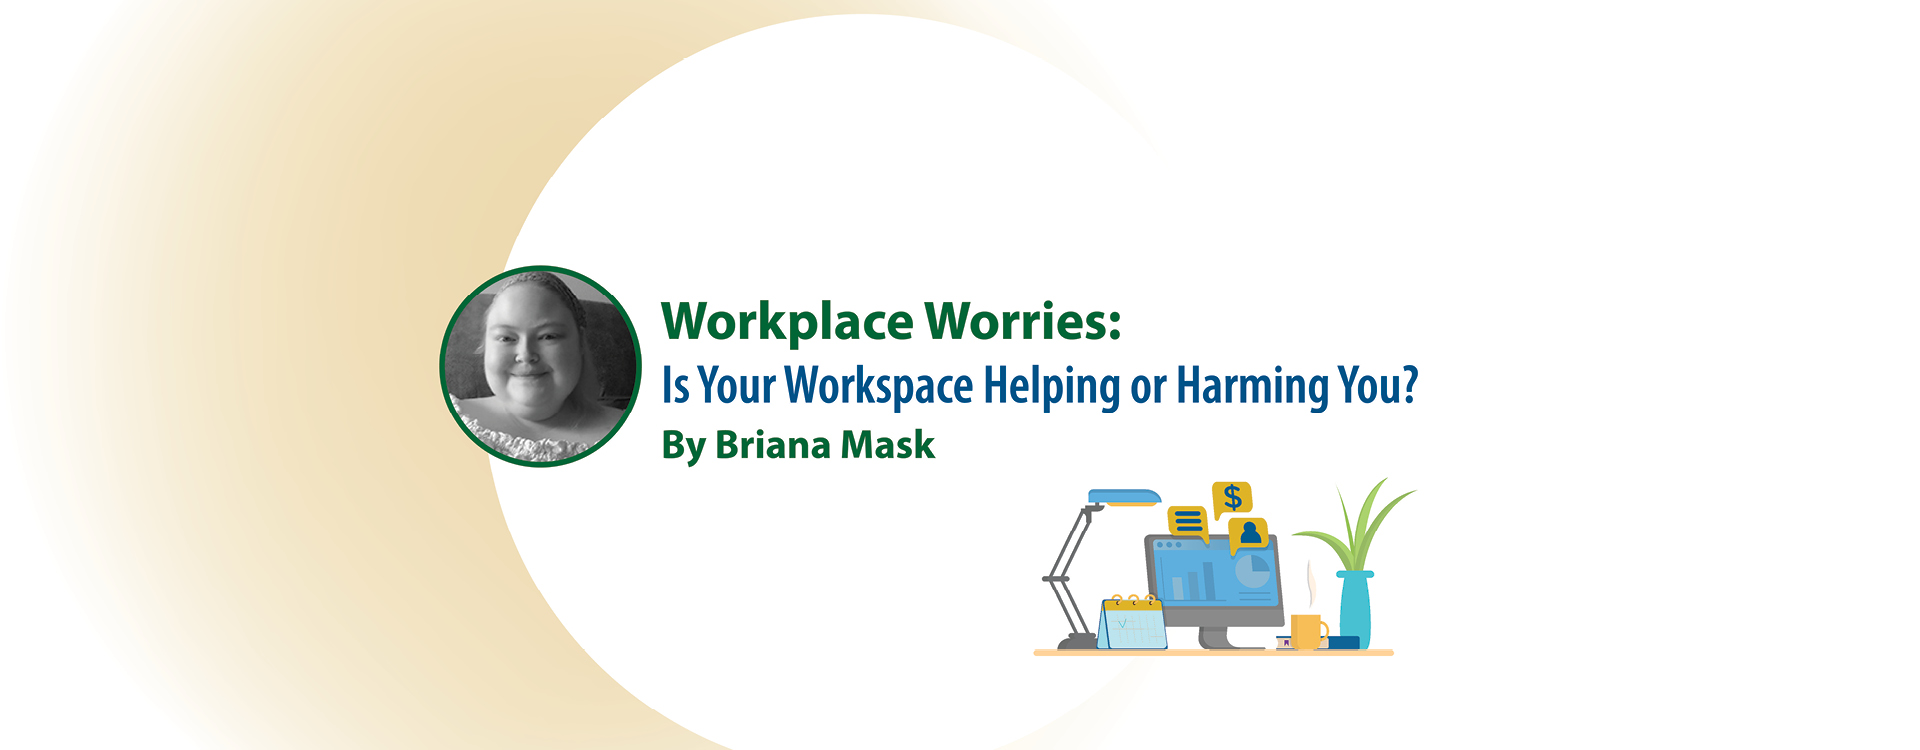 Featured image for “Workspace Worries: Is Your Workspace Helping or Harming You?”